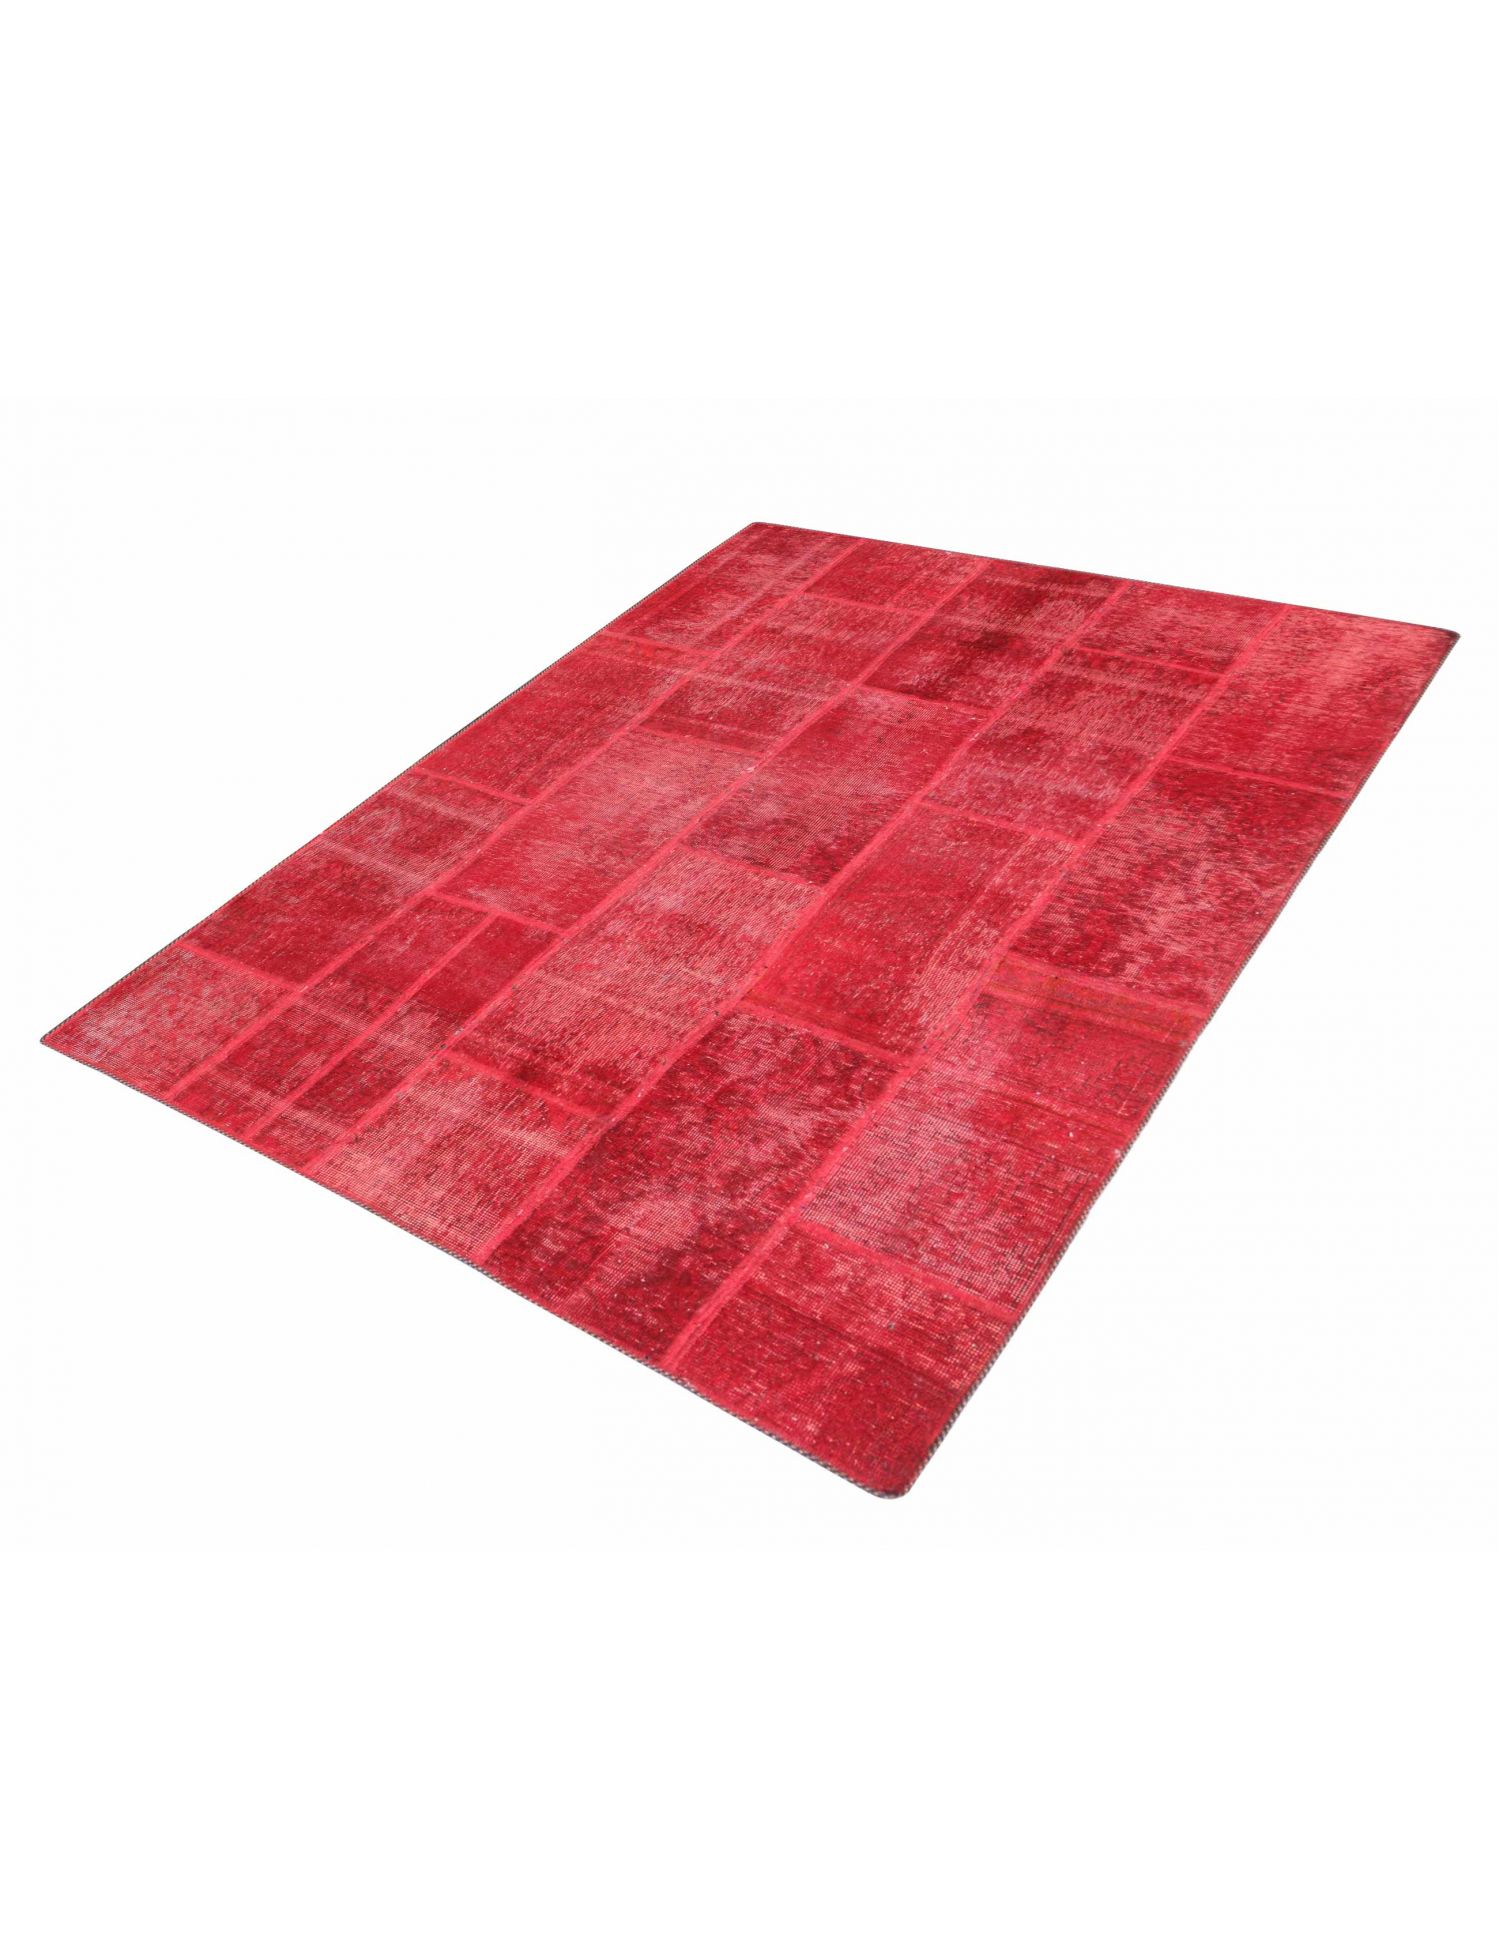 Tappeto Patchwork  rosso <br/>210 x 150 cm